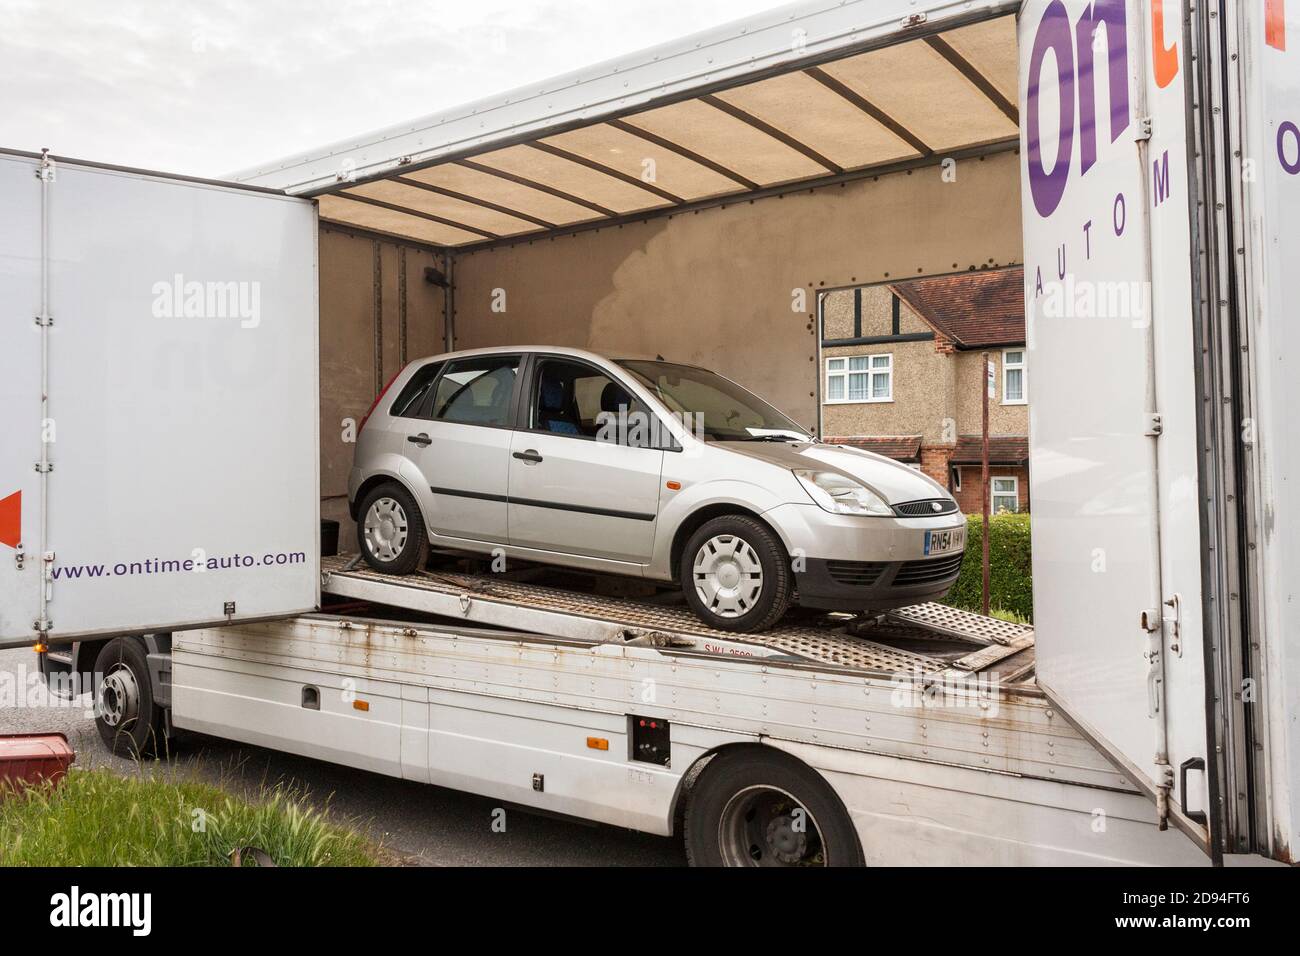 Recovered Ford Fiesta vehicle on HGV on UK street Stock Photo